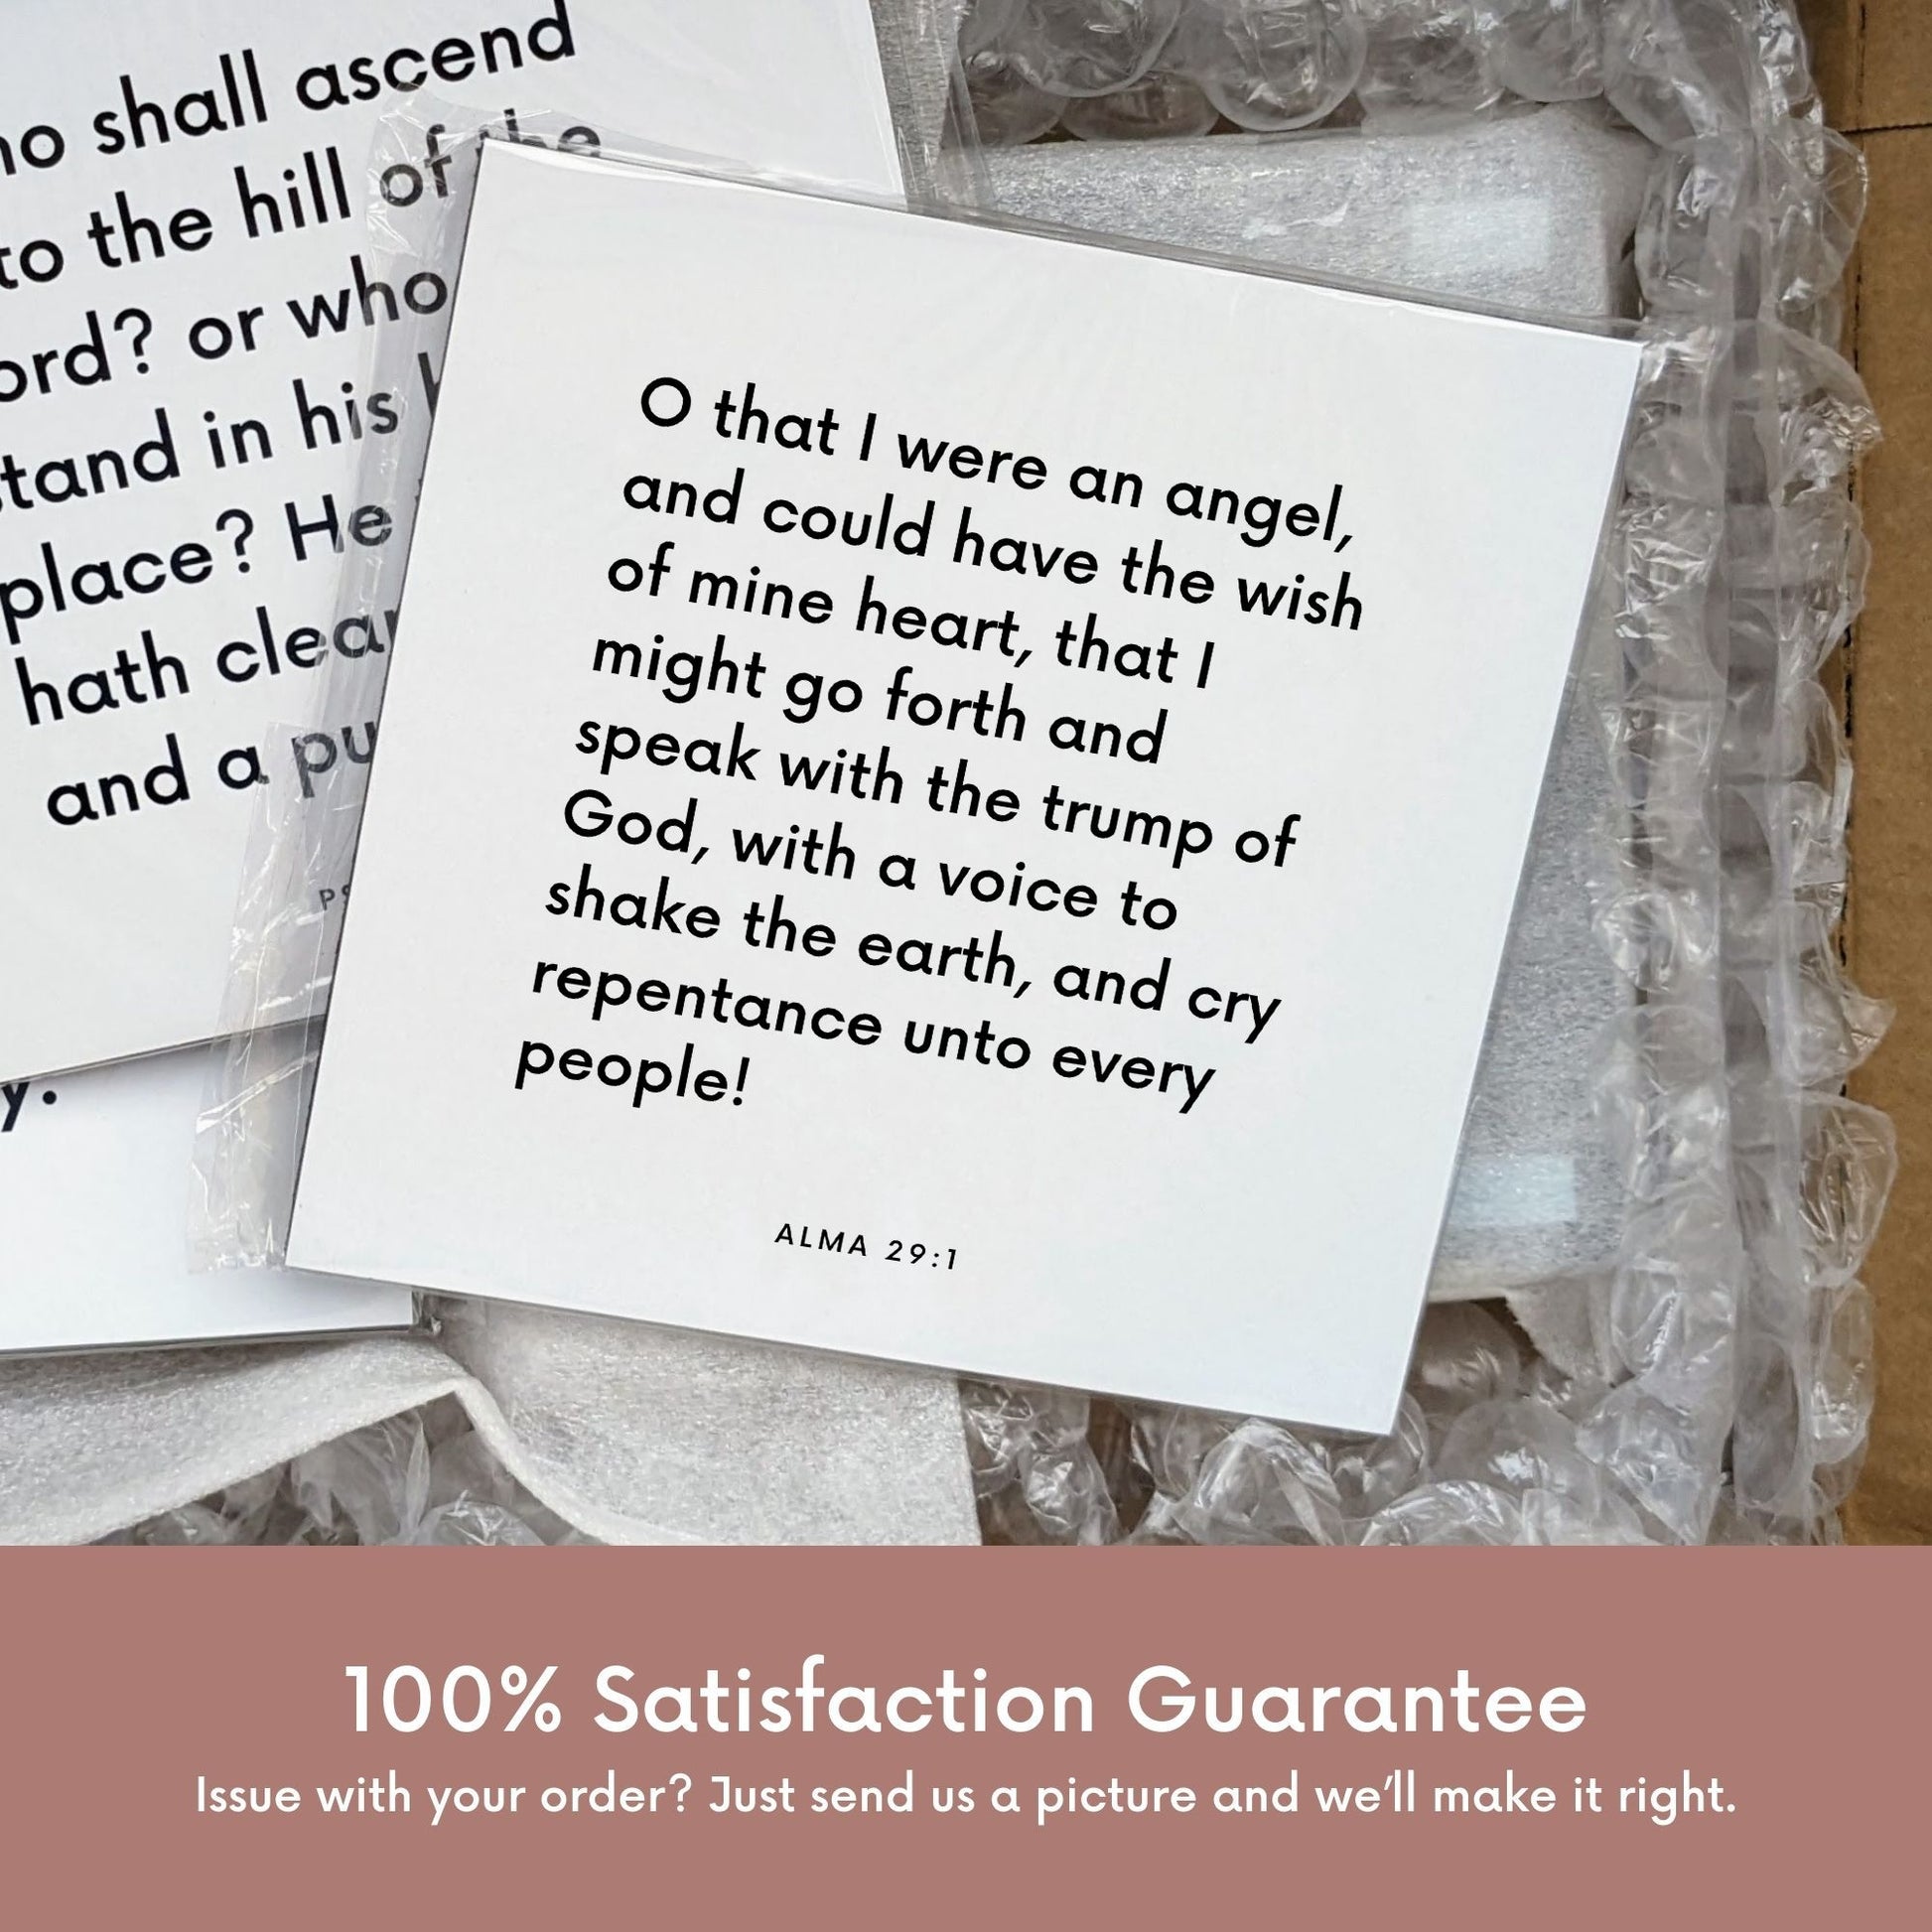 Shipping materials for scripture tile of Alma 29:1 - "O that I were an angel, and could have the wish of mine heart"